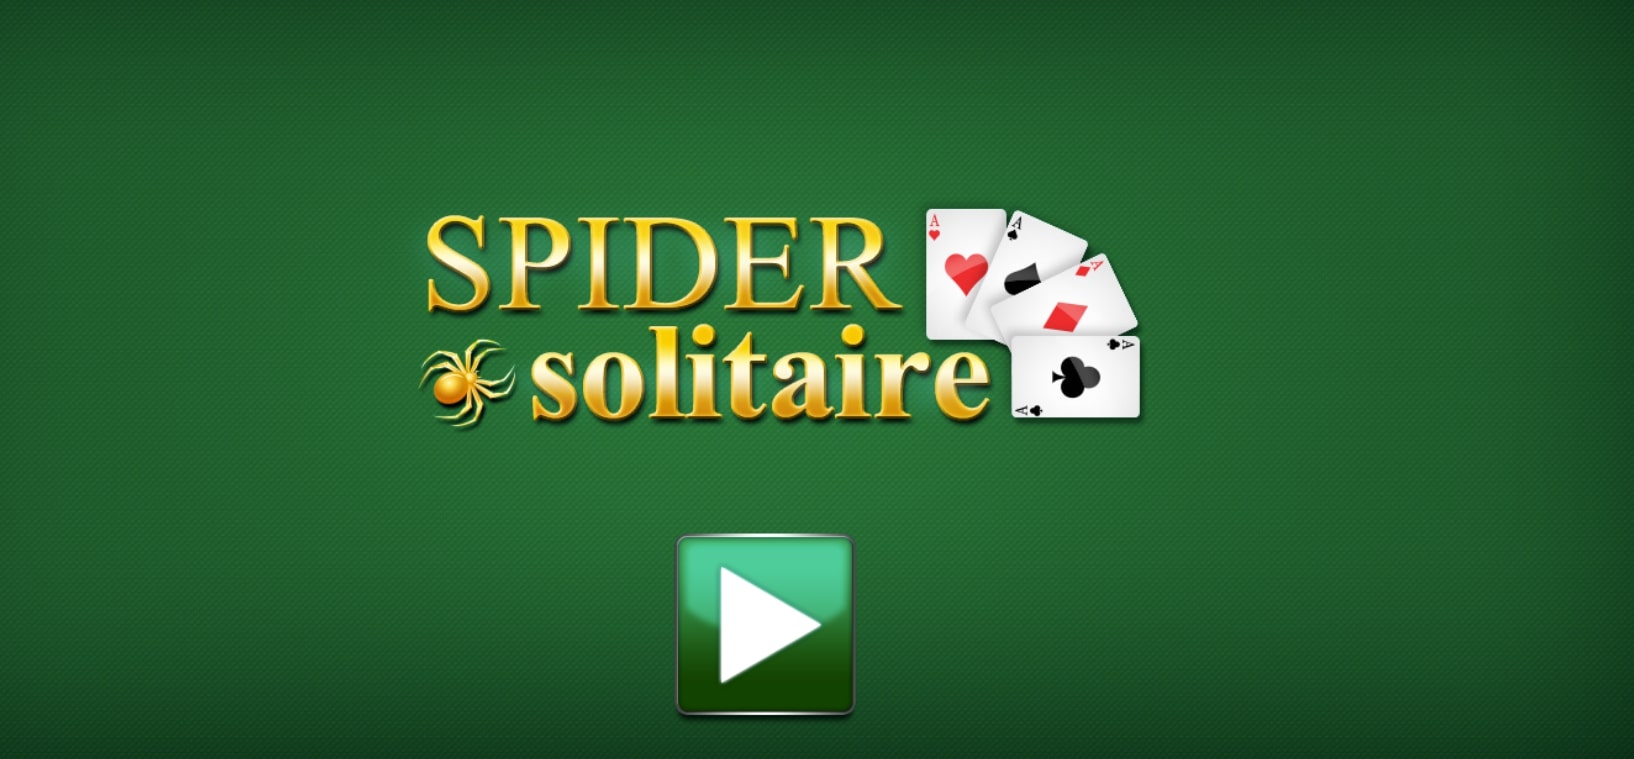 free spider solitaire games to play